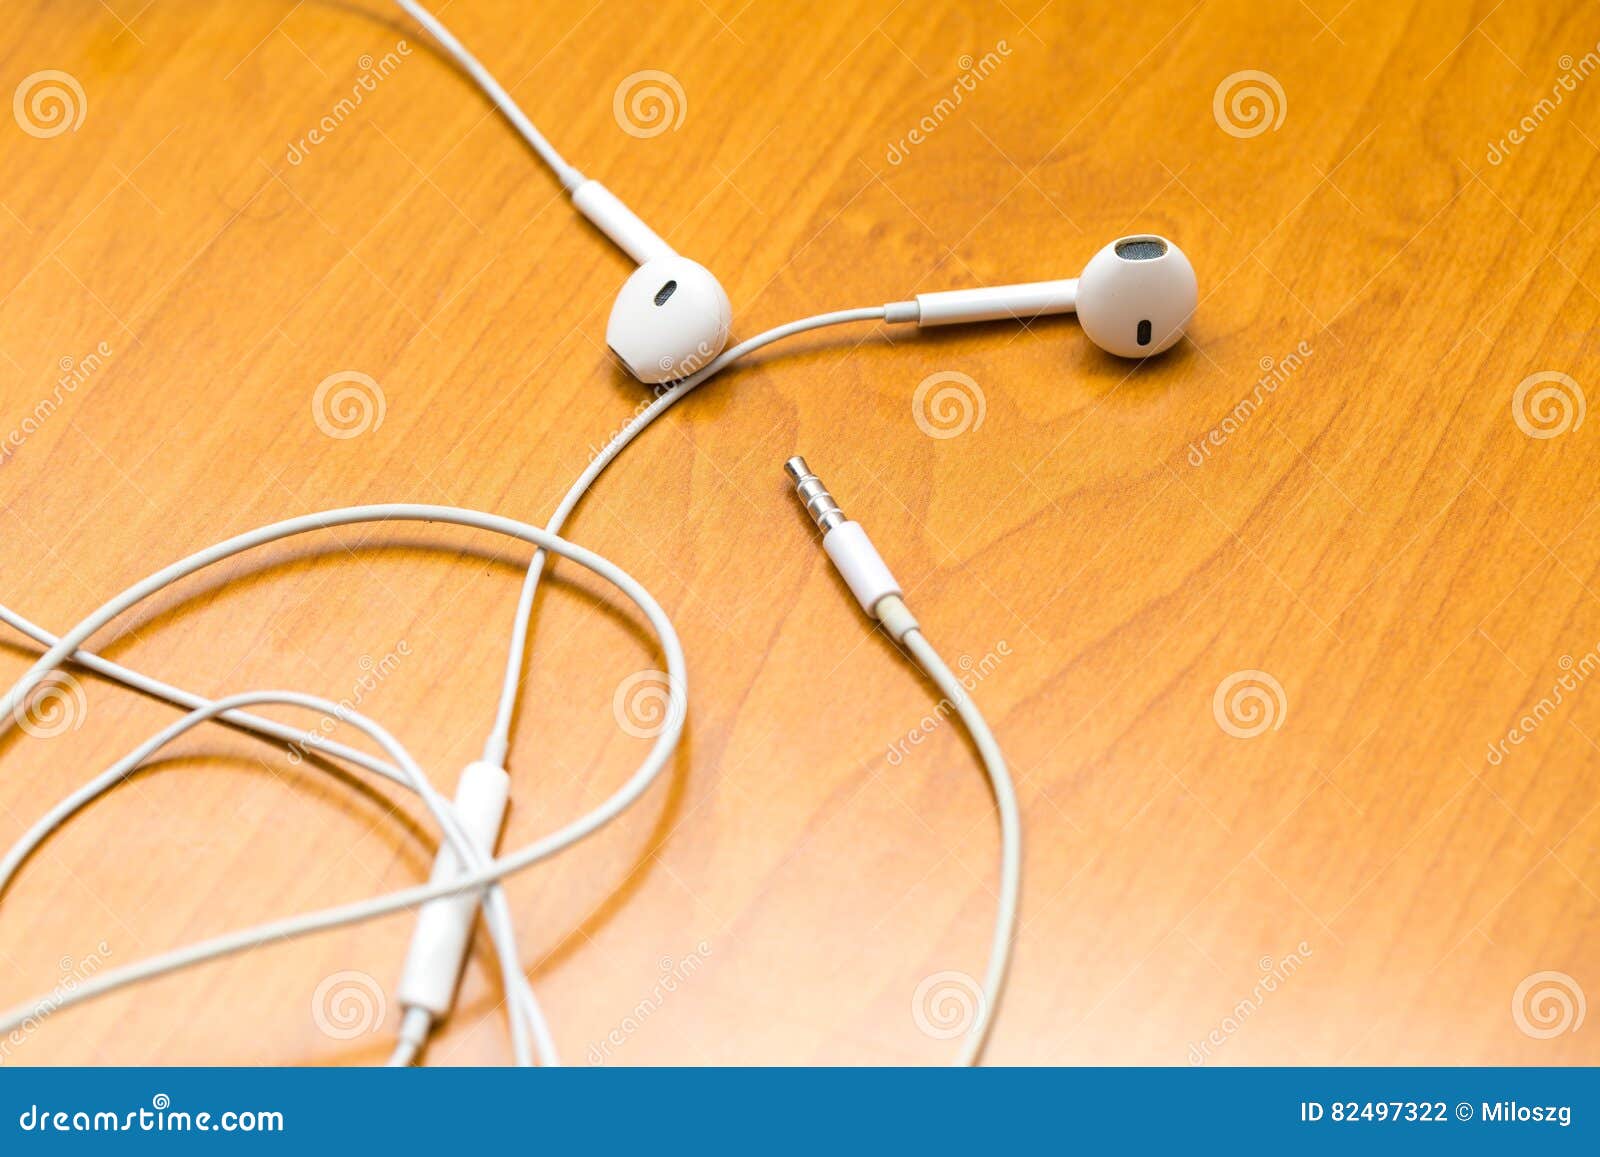 Close up of white headphones lying on wooden table. Small white earphones.